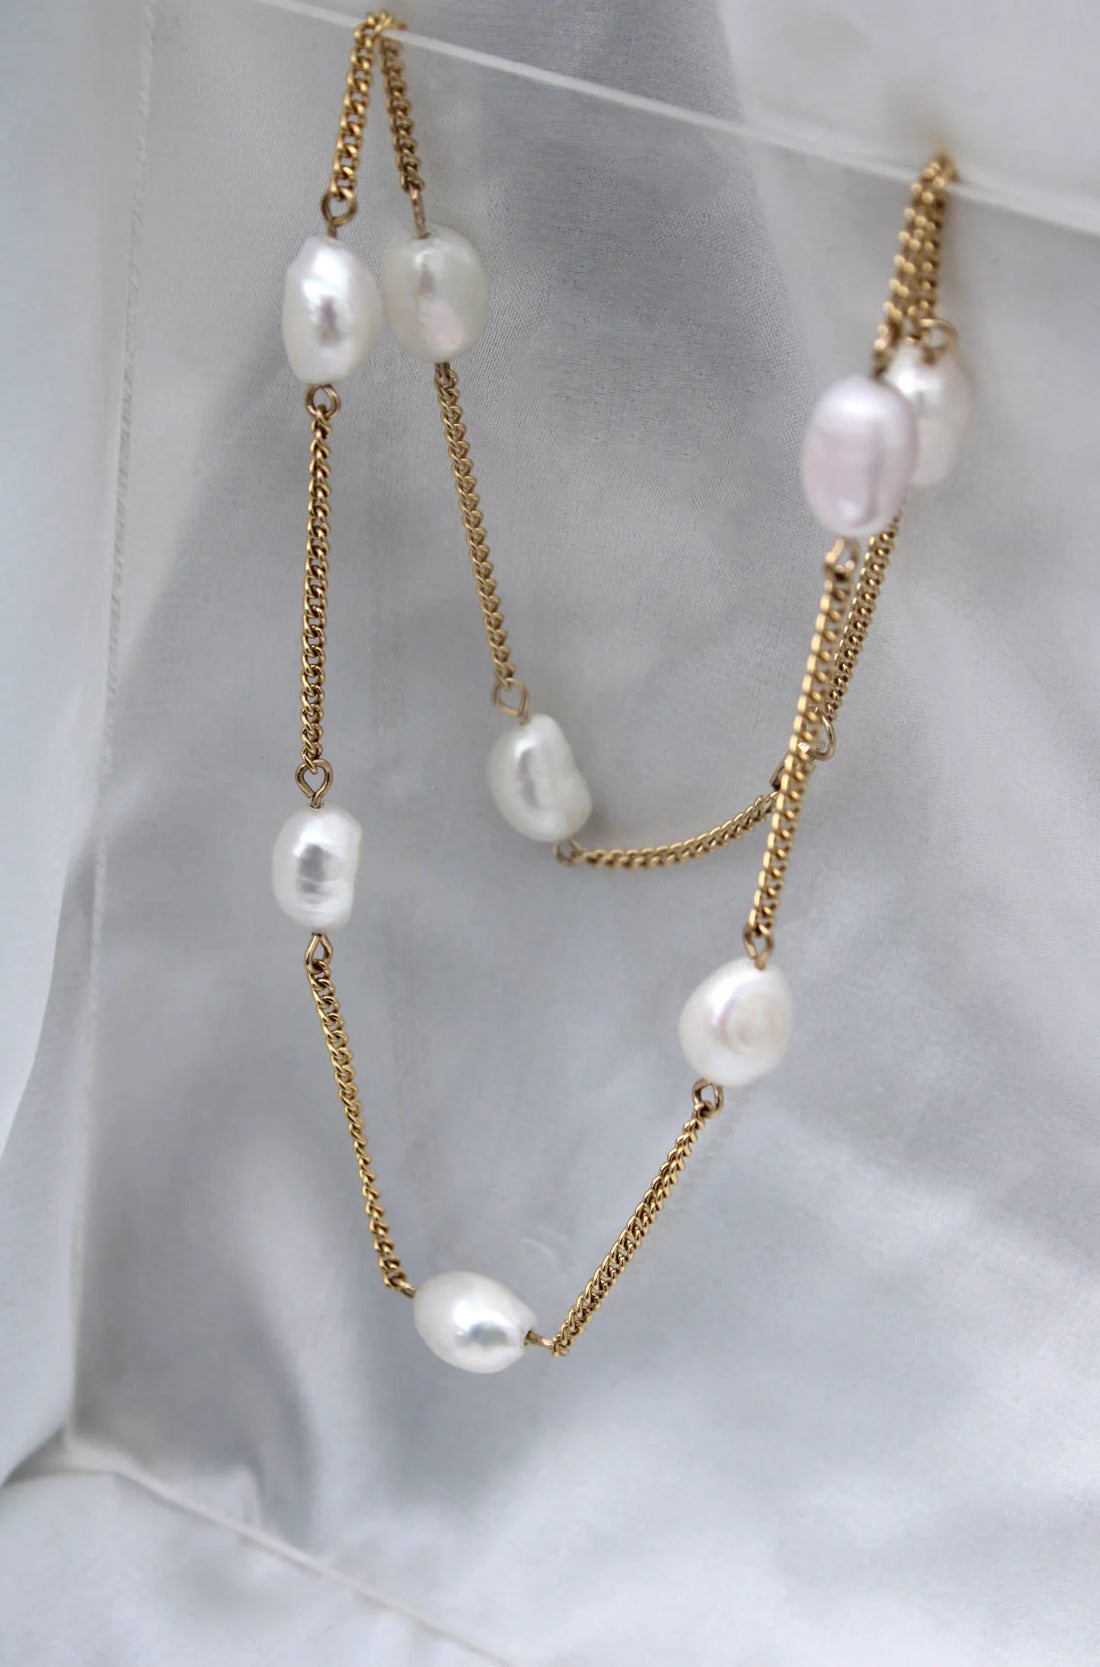 Sadie Jo Jewelry Co. Chunky White Pearl Necklace in Gold